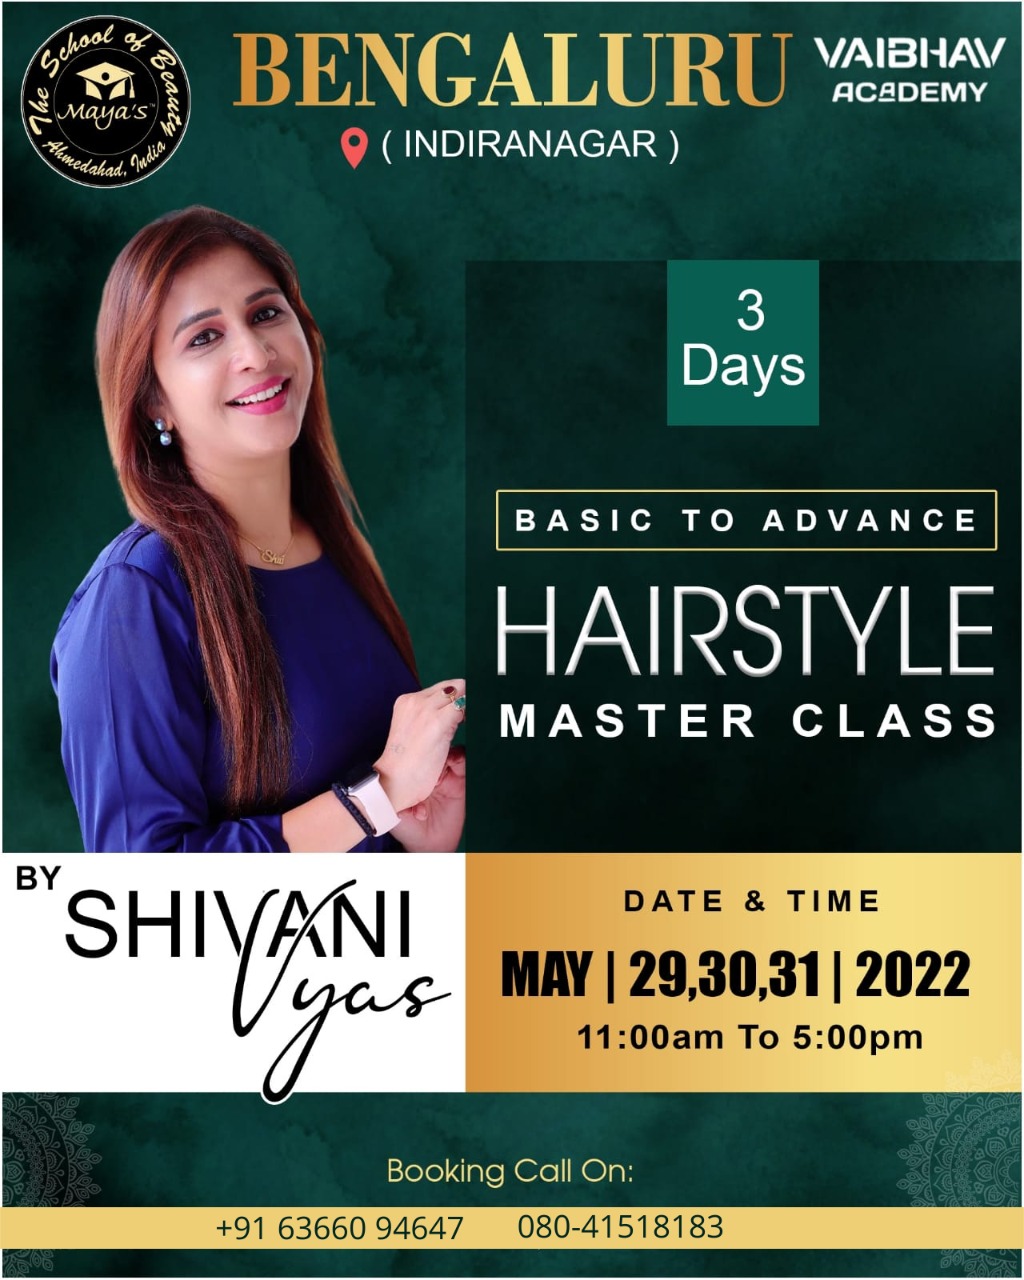 Three days to Basic to Advance Hair Styling Master class